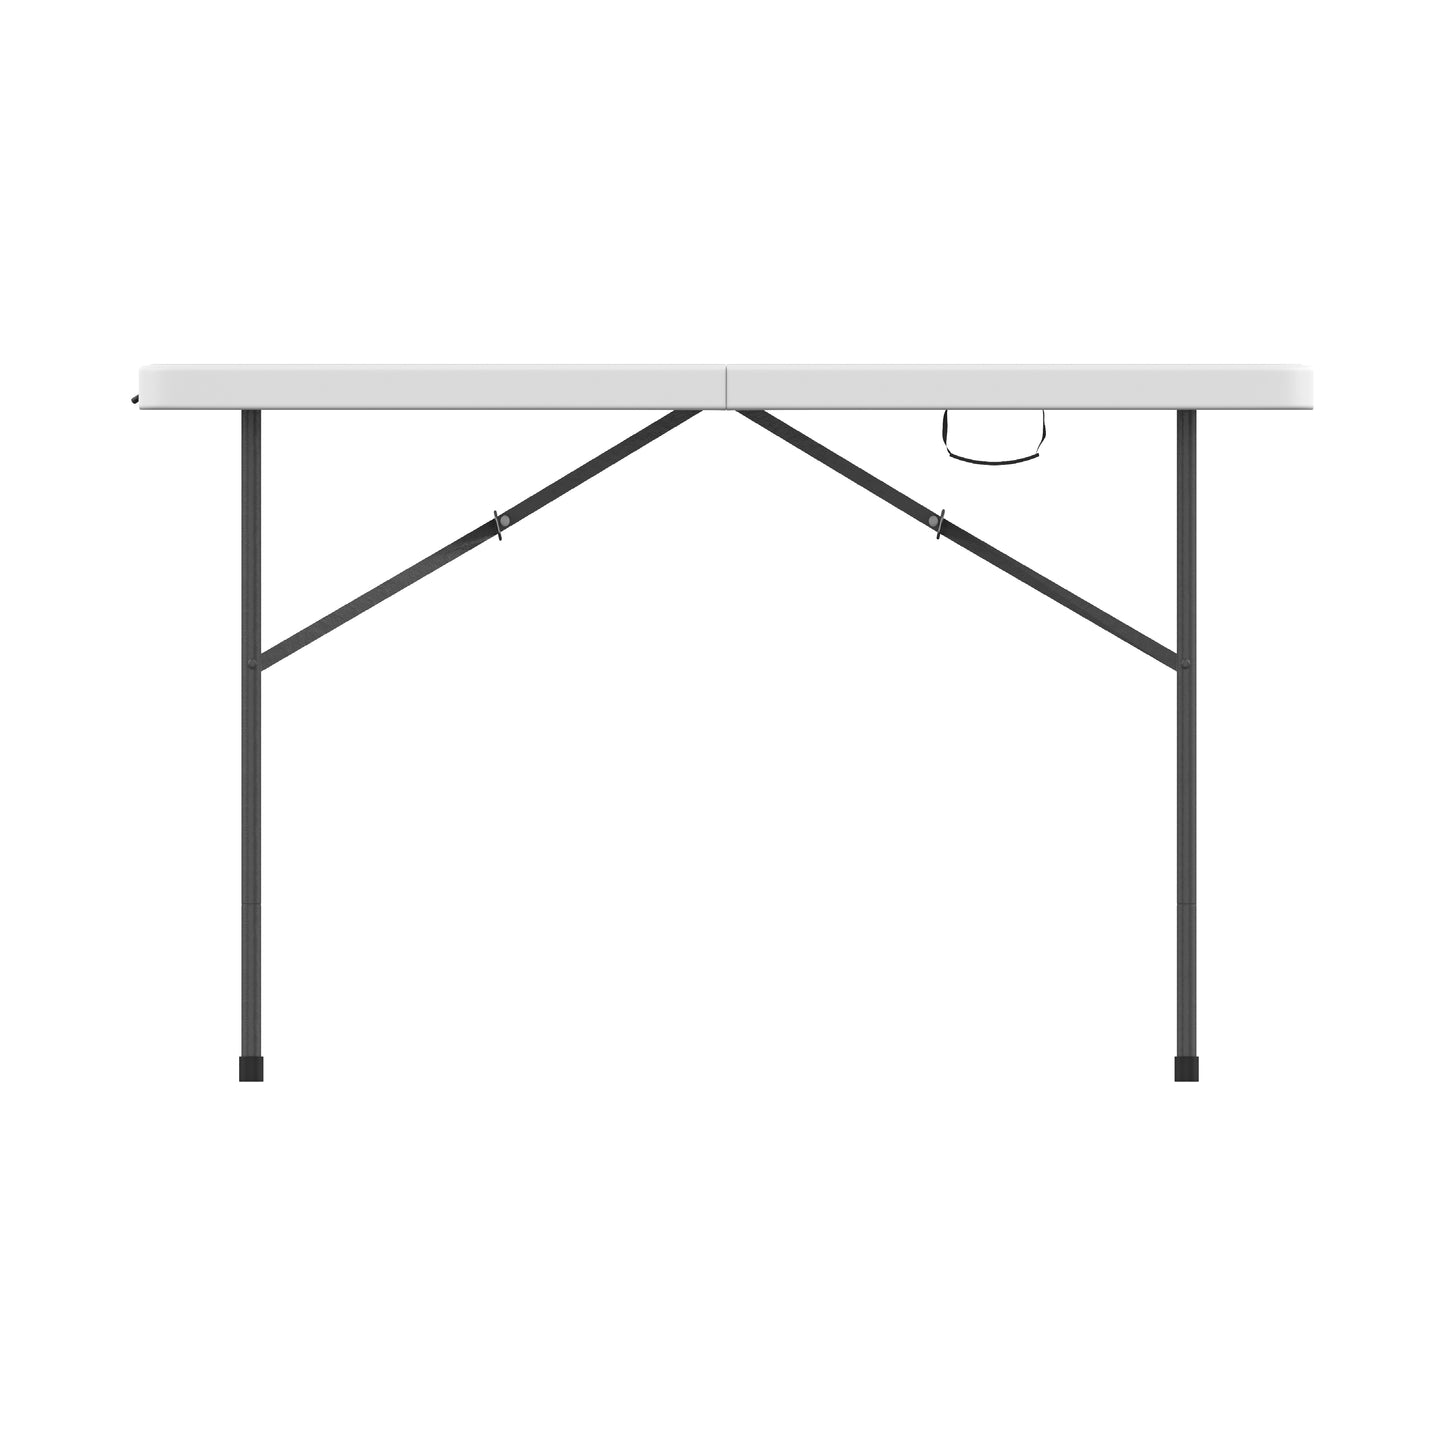 122 cm Folding Picnic Table with Steel Legs